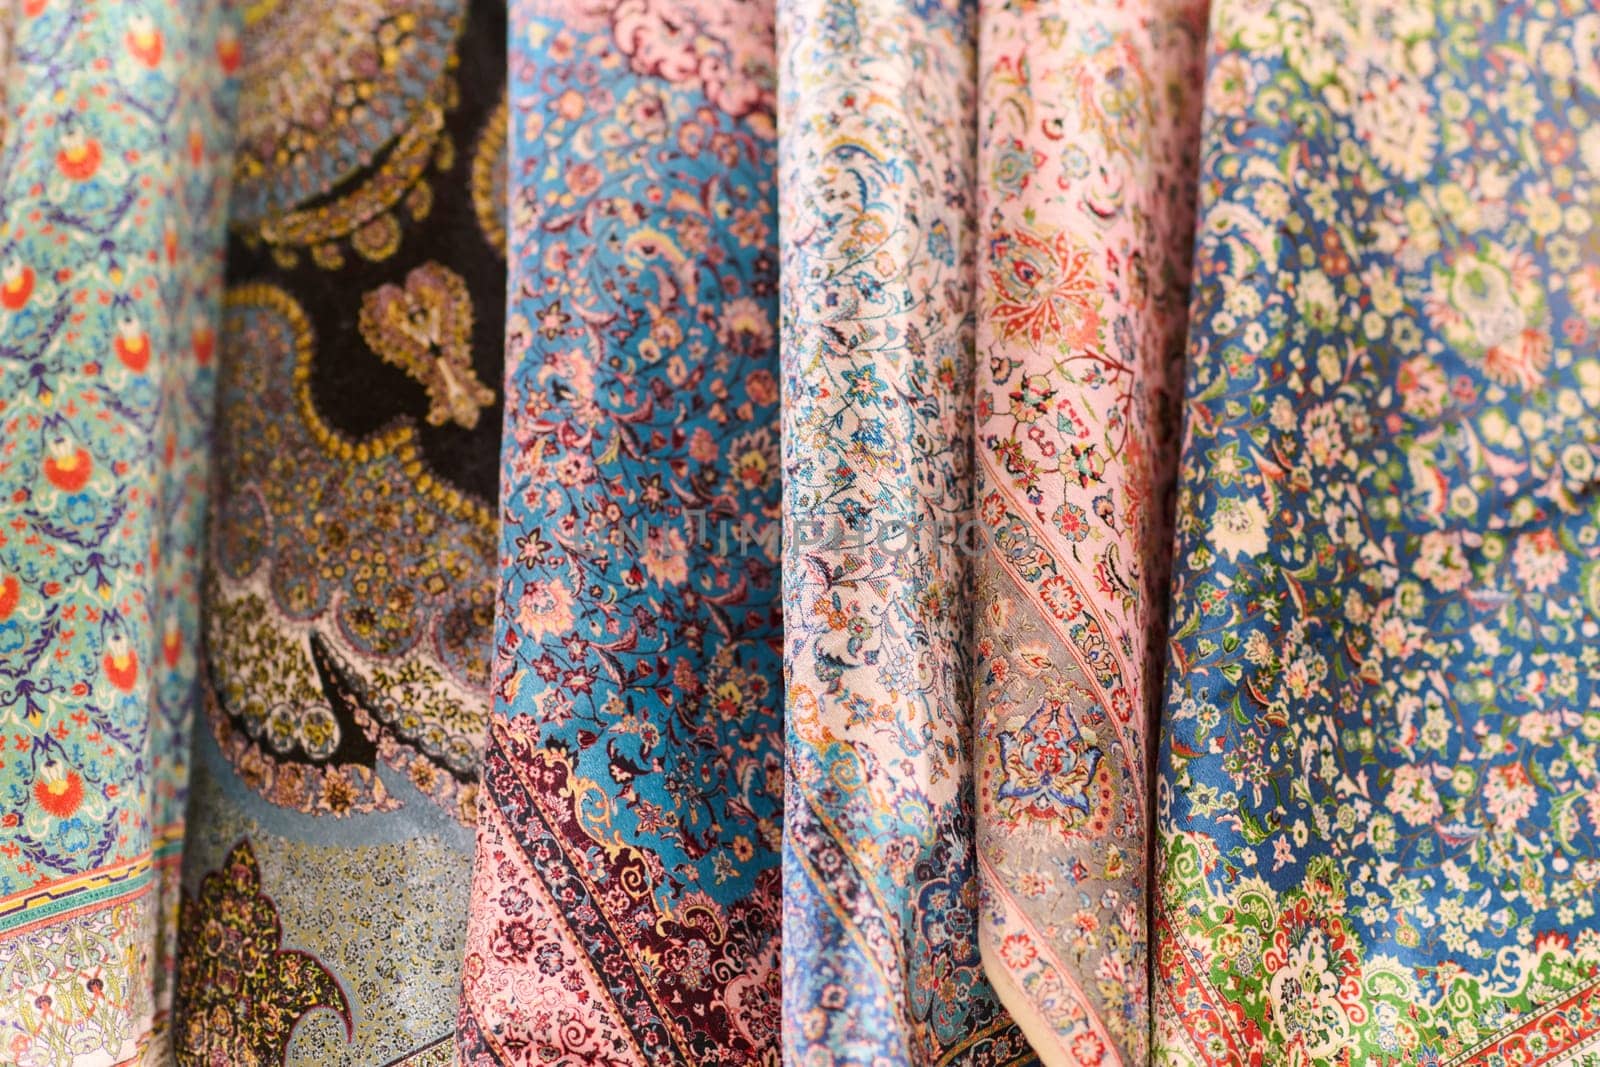 A kaleidoscope of traditional Muslim garments displayed at an Istanbul market reflects the rich cultural heritage of the city.